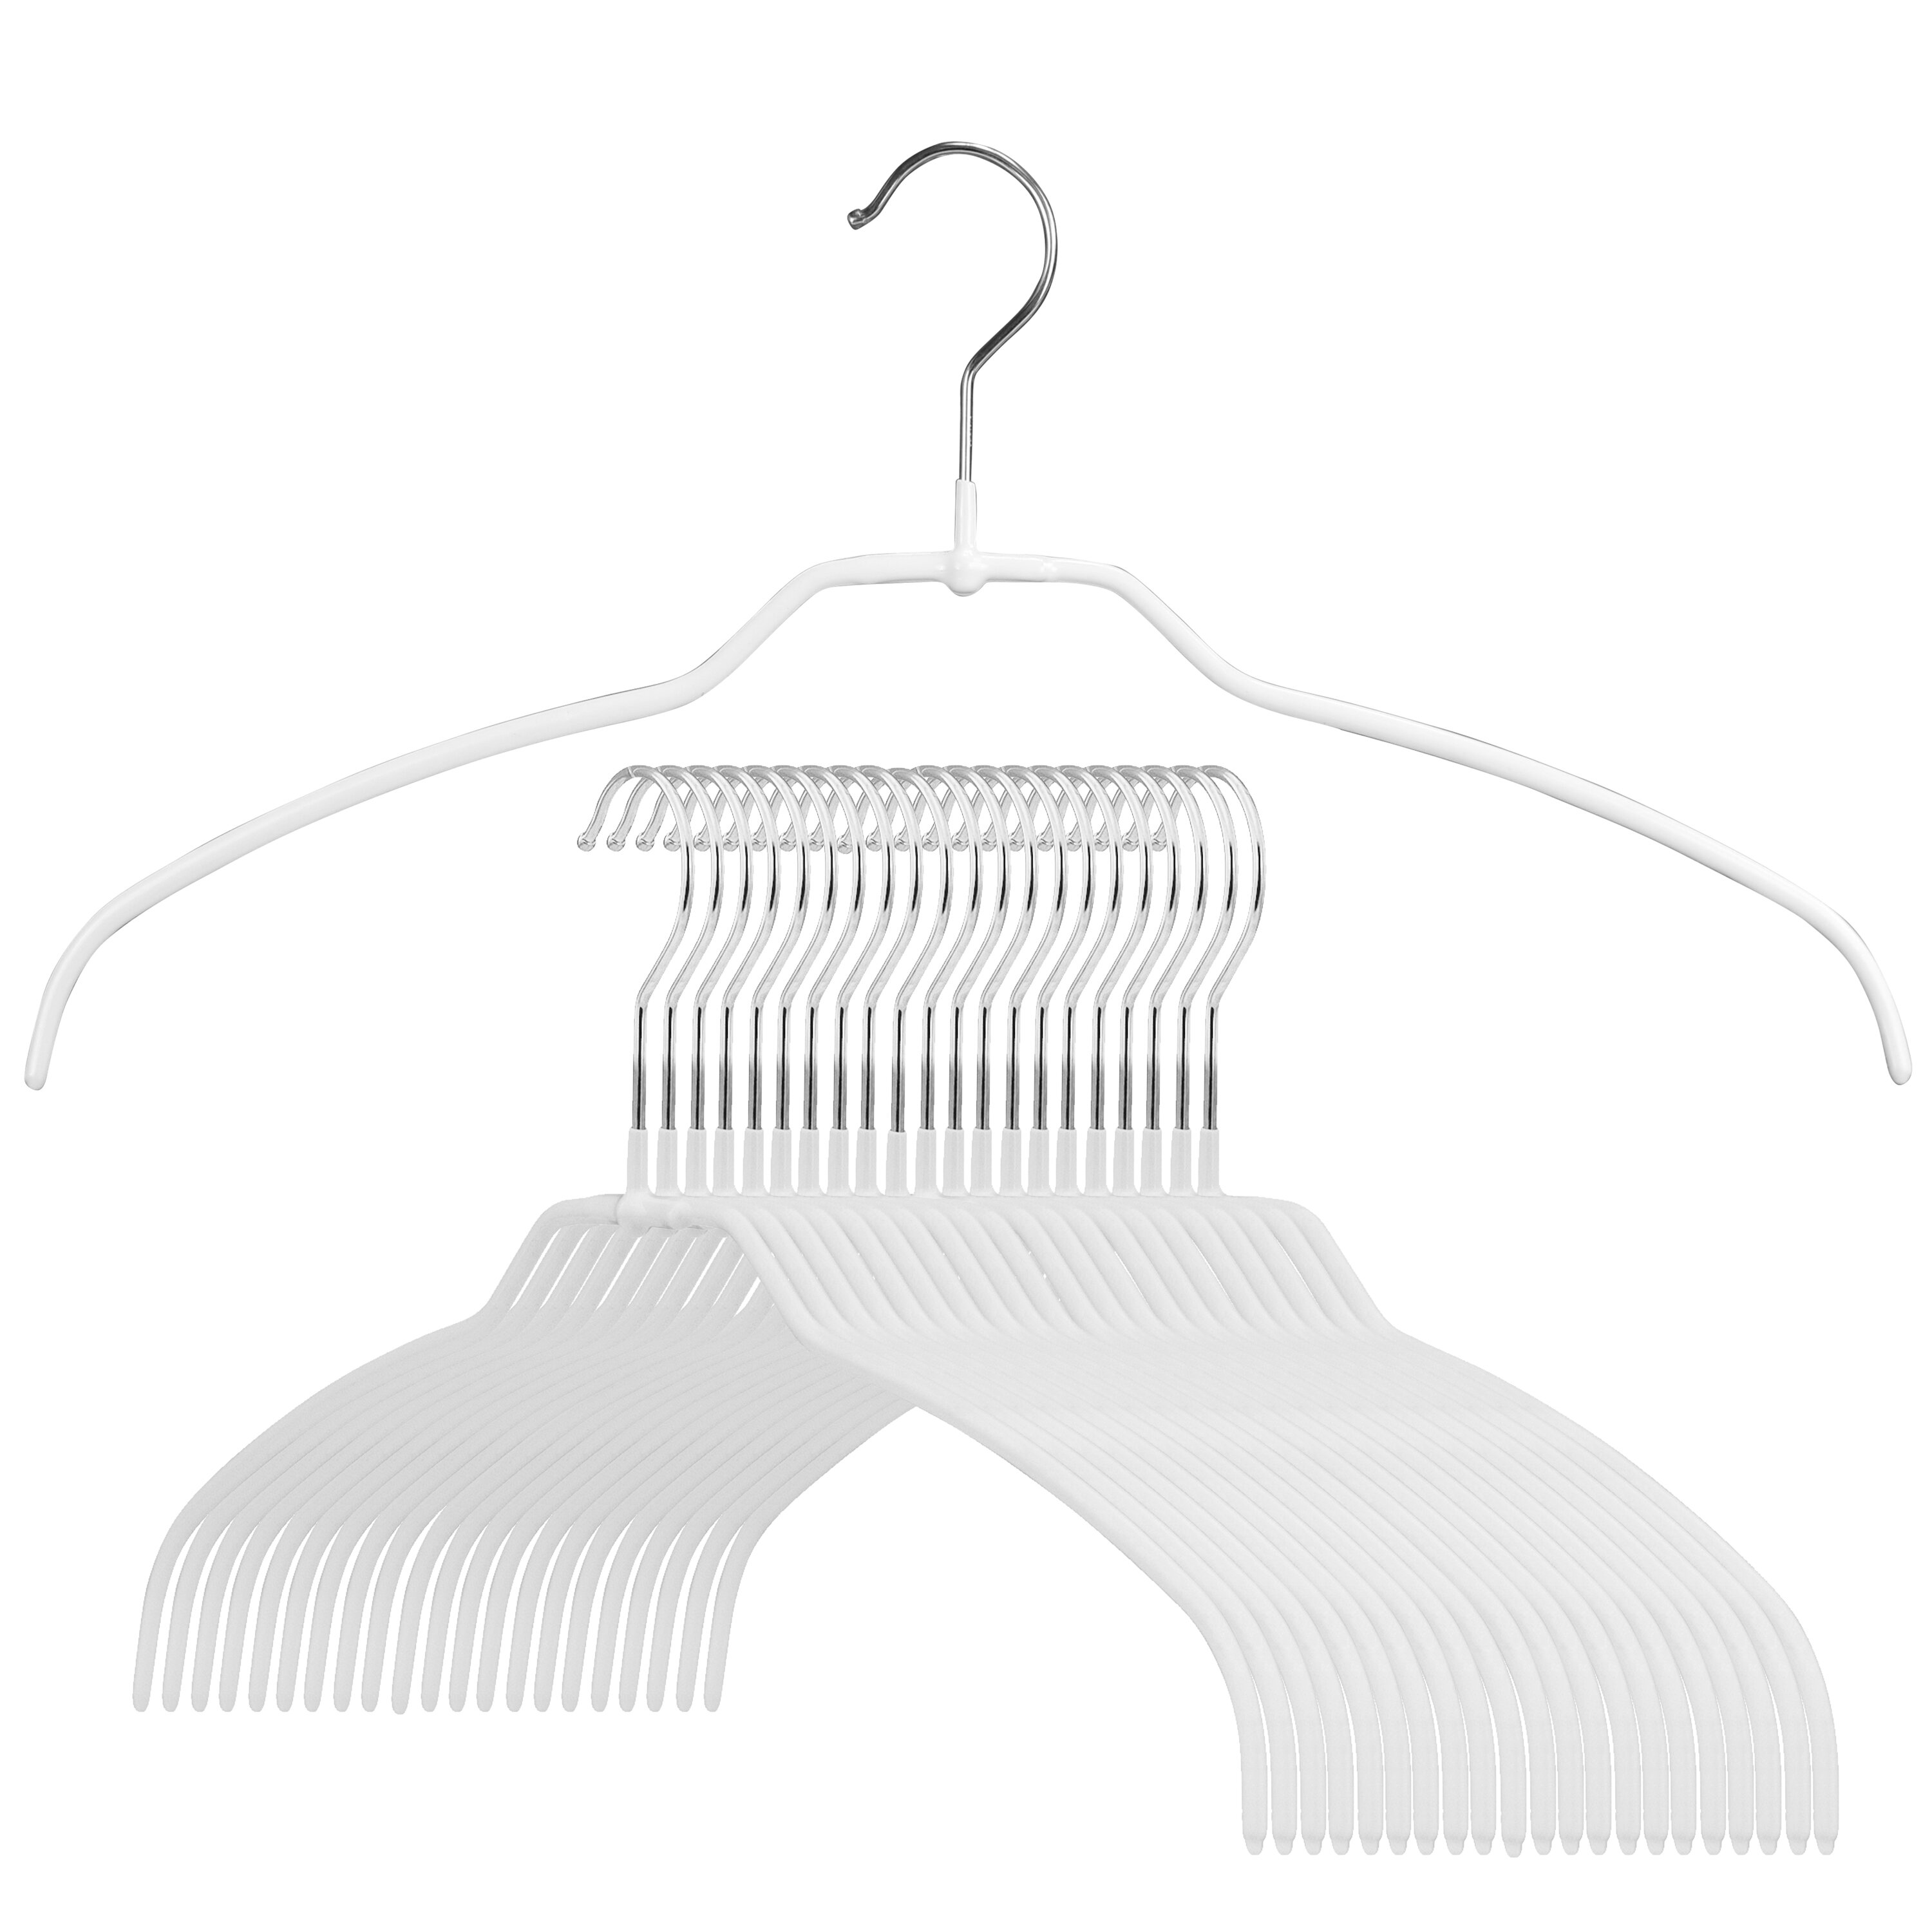 MAWA European Space-Saving Hangers, 3 Colors, 8 Styles & Sets, Made in  Germany